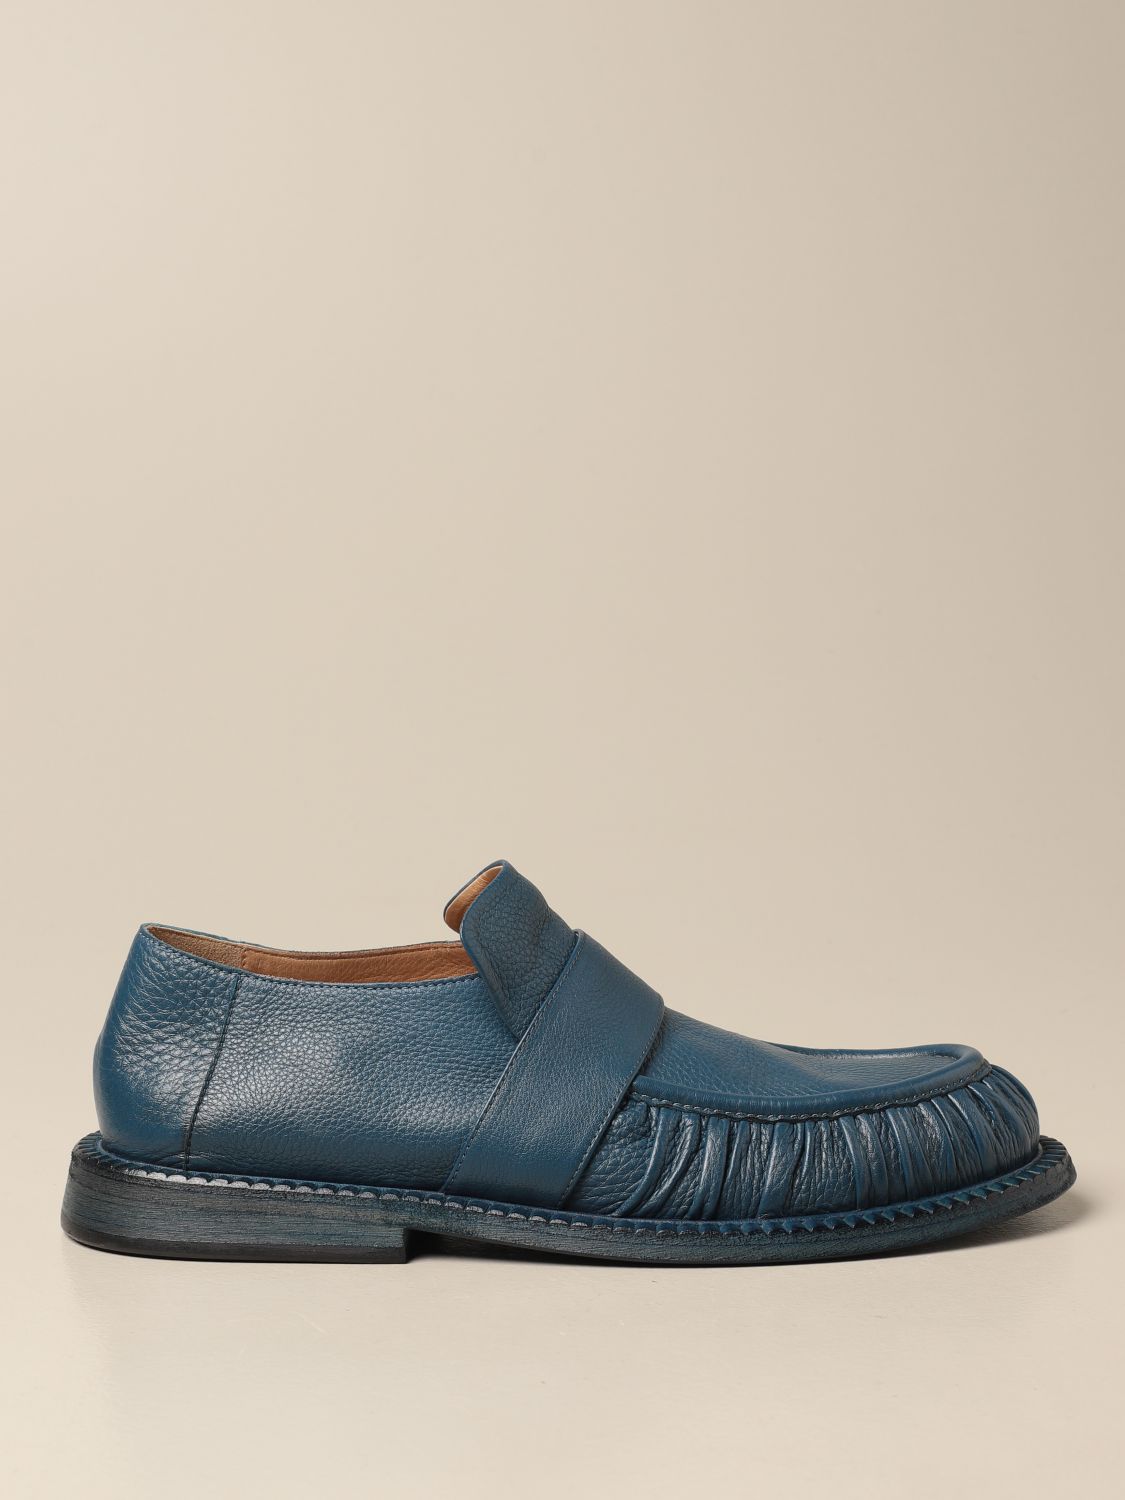 teal loafers mens